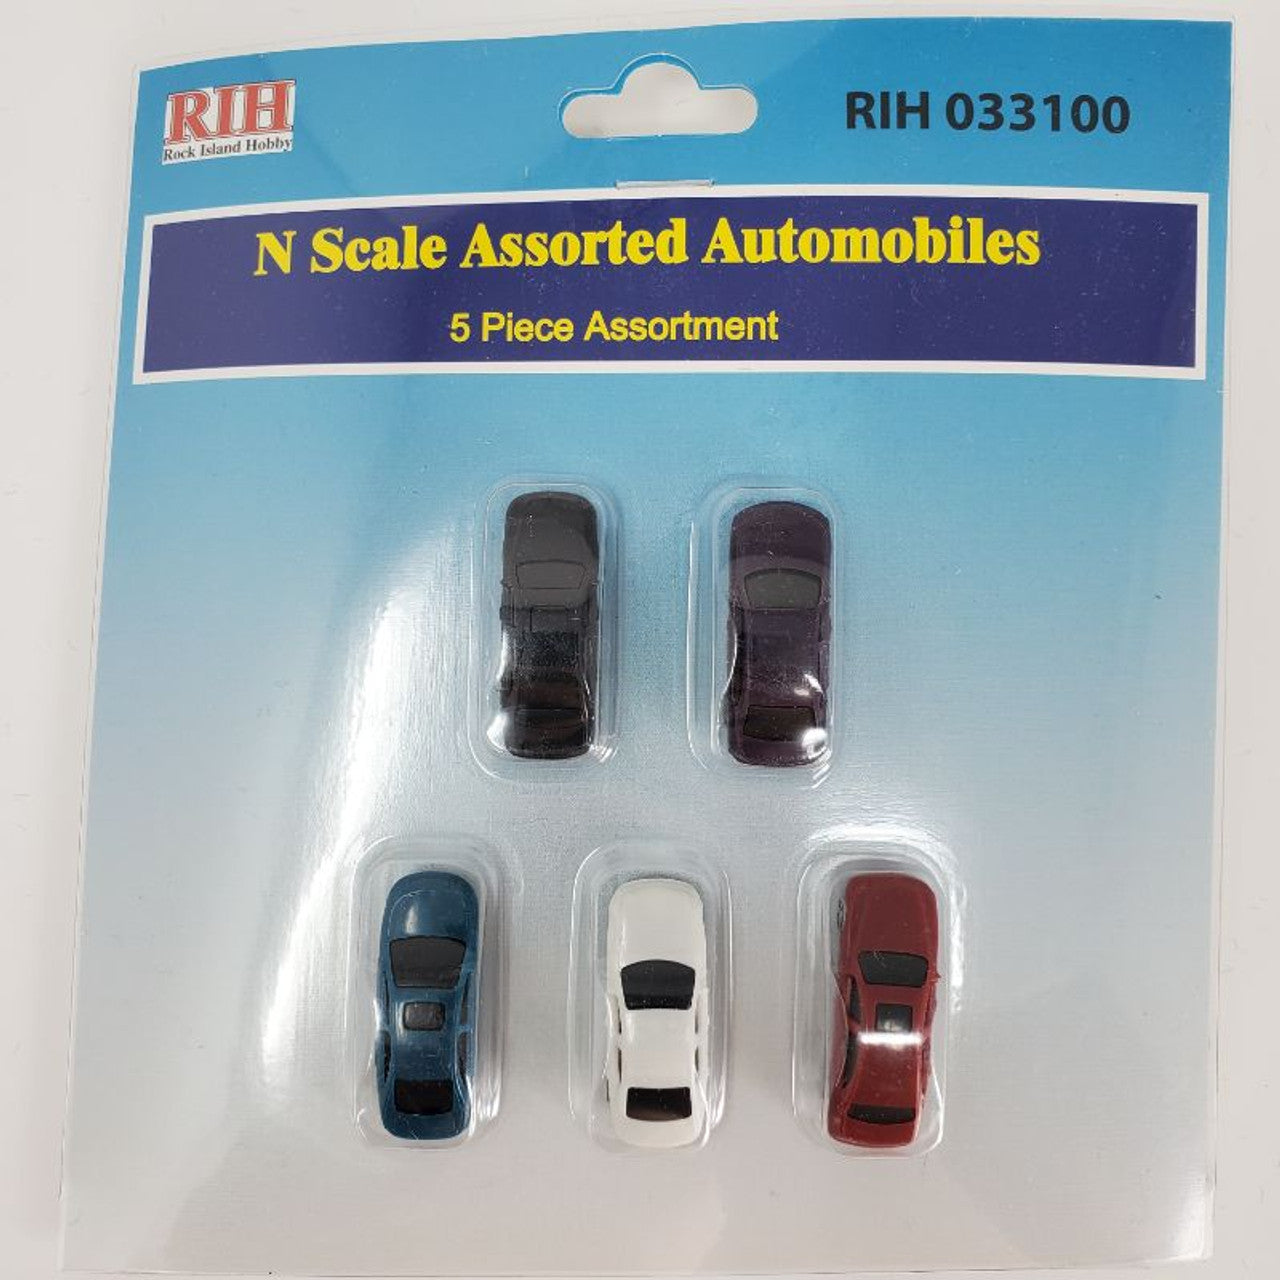 Copy of RIH (Rock Island Hobby) 5 Automobiles N Scale